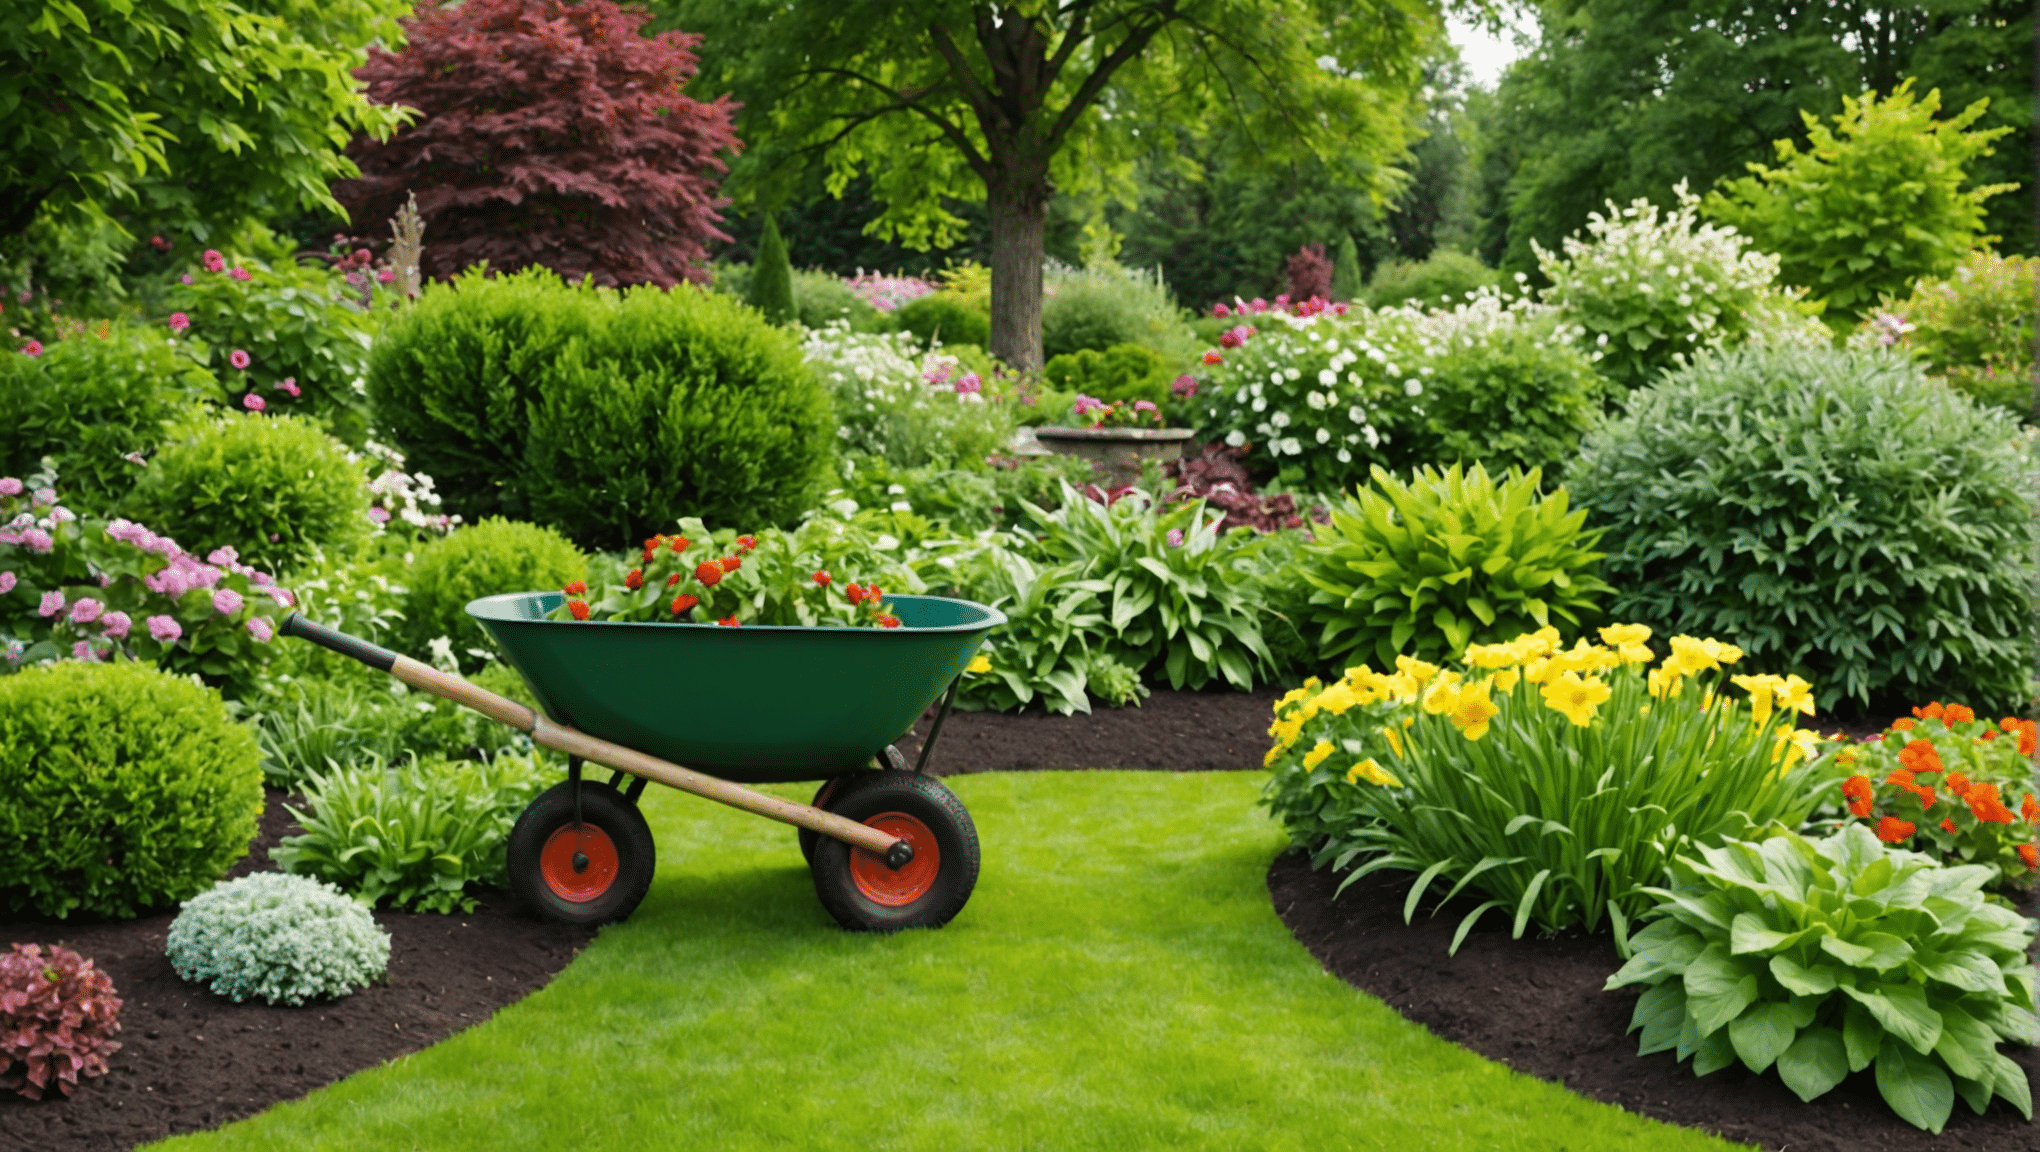 discover the benefits of organic fertilizers for your garden and how they provide a natural solution for nurturing your plants and soil.